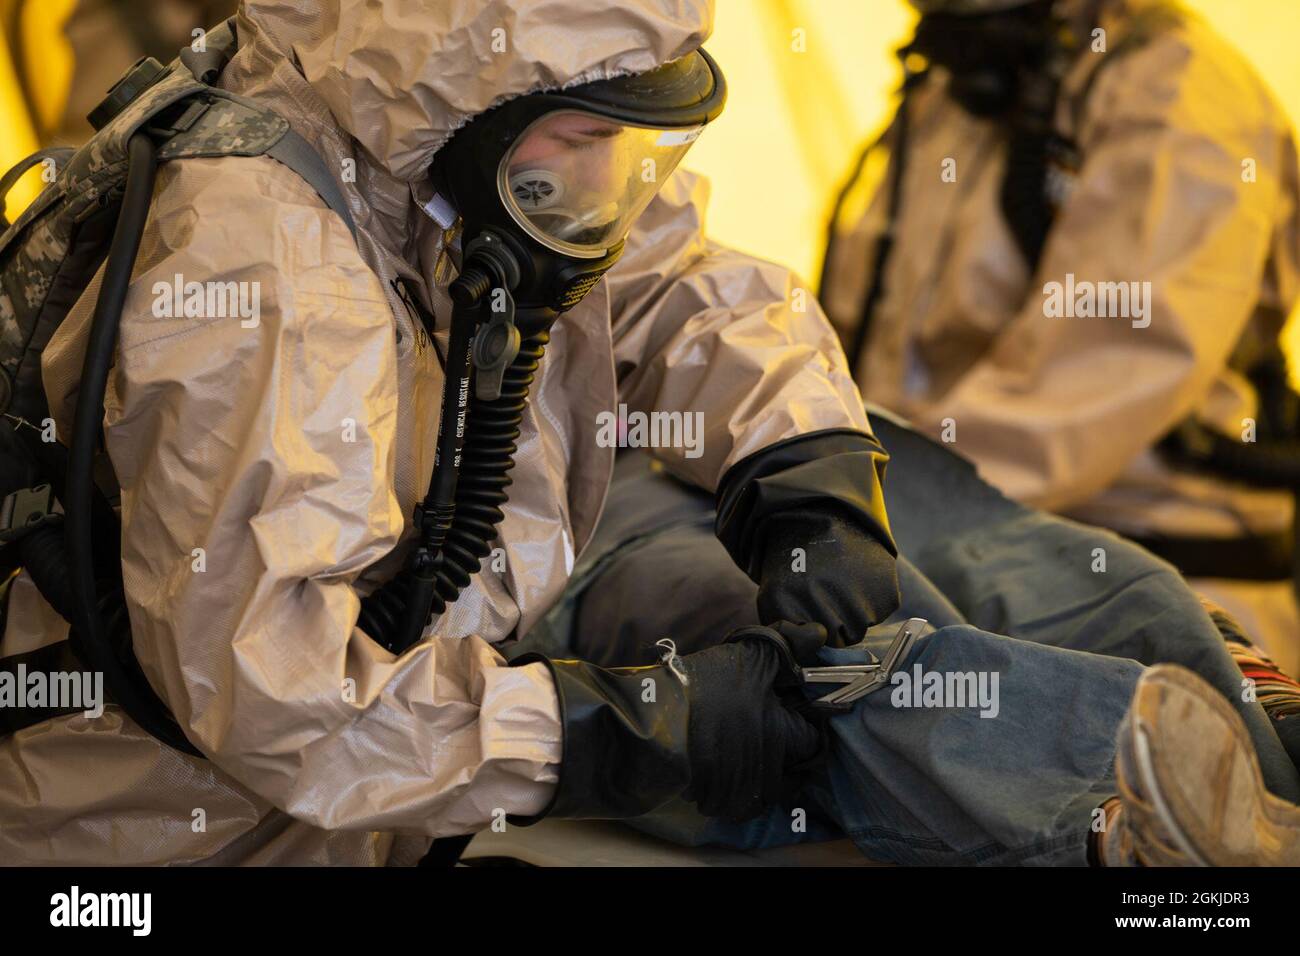 https://c8.alamy.com/comp/2GKJDR3/soldiers-in-the-wisconsin-national-guards-chemical-biological-radiological-nuclear-cbrn-enhanced-response-force-package-remove-contaminated-clothing-from-a-wounded-civilian-during-a-training-exercise-simulating-an-explosion-at-the-mall-of-america-in-minneapolis-may-1-at-volk-field-wis-the-joint-unit-includes-soldiers-from-the-wisconsin-army-national-guards-273rd-engineer-company-in-medford-the-457th-chemical-company-in-hartford-and-burlington-and-a-command-and-control-element-from-the-641st-troop-command-battalion-headquarters-in-madison-as-well-as-airmen-from-the-madison-based-115th-2GKJDR3.jpg